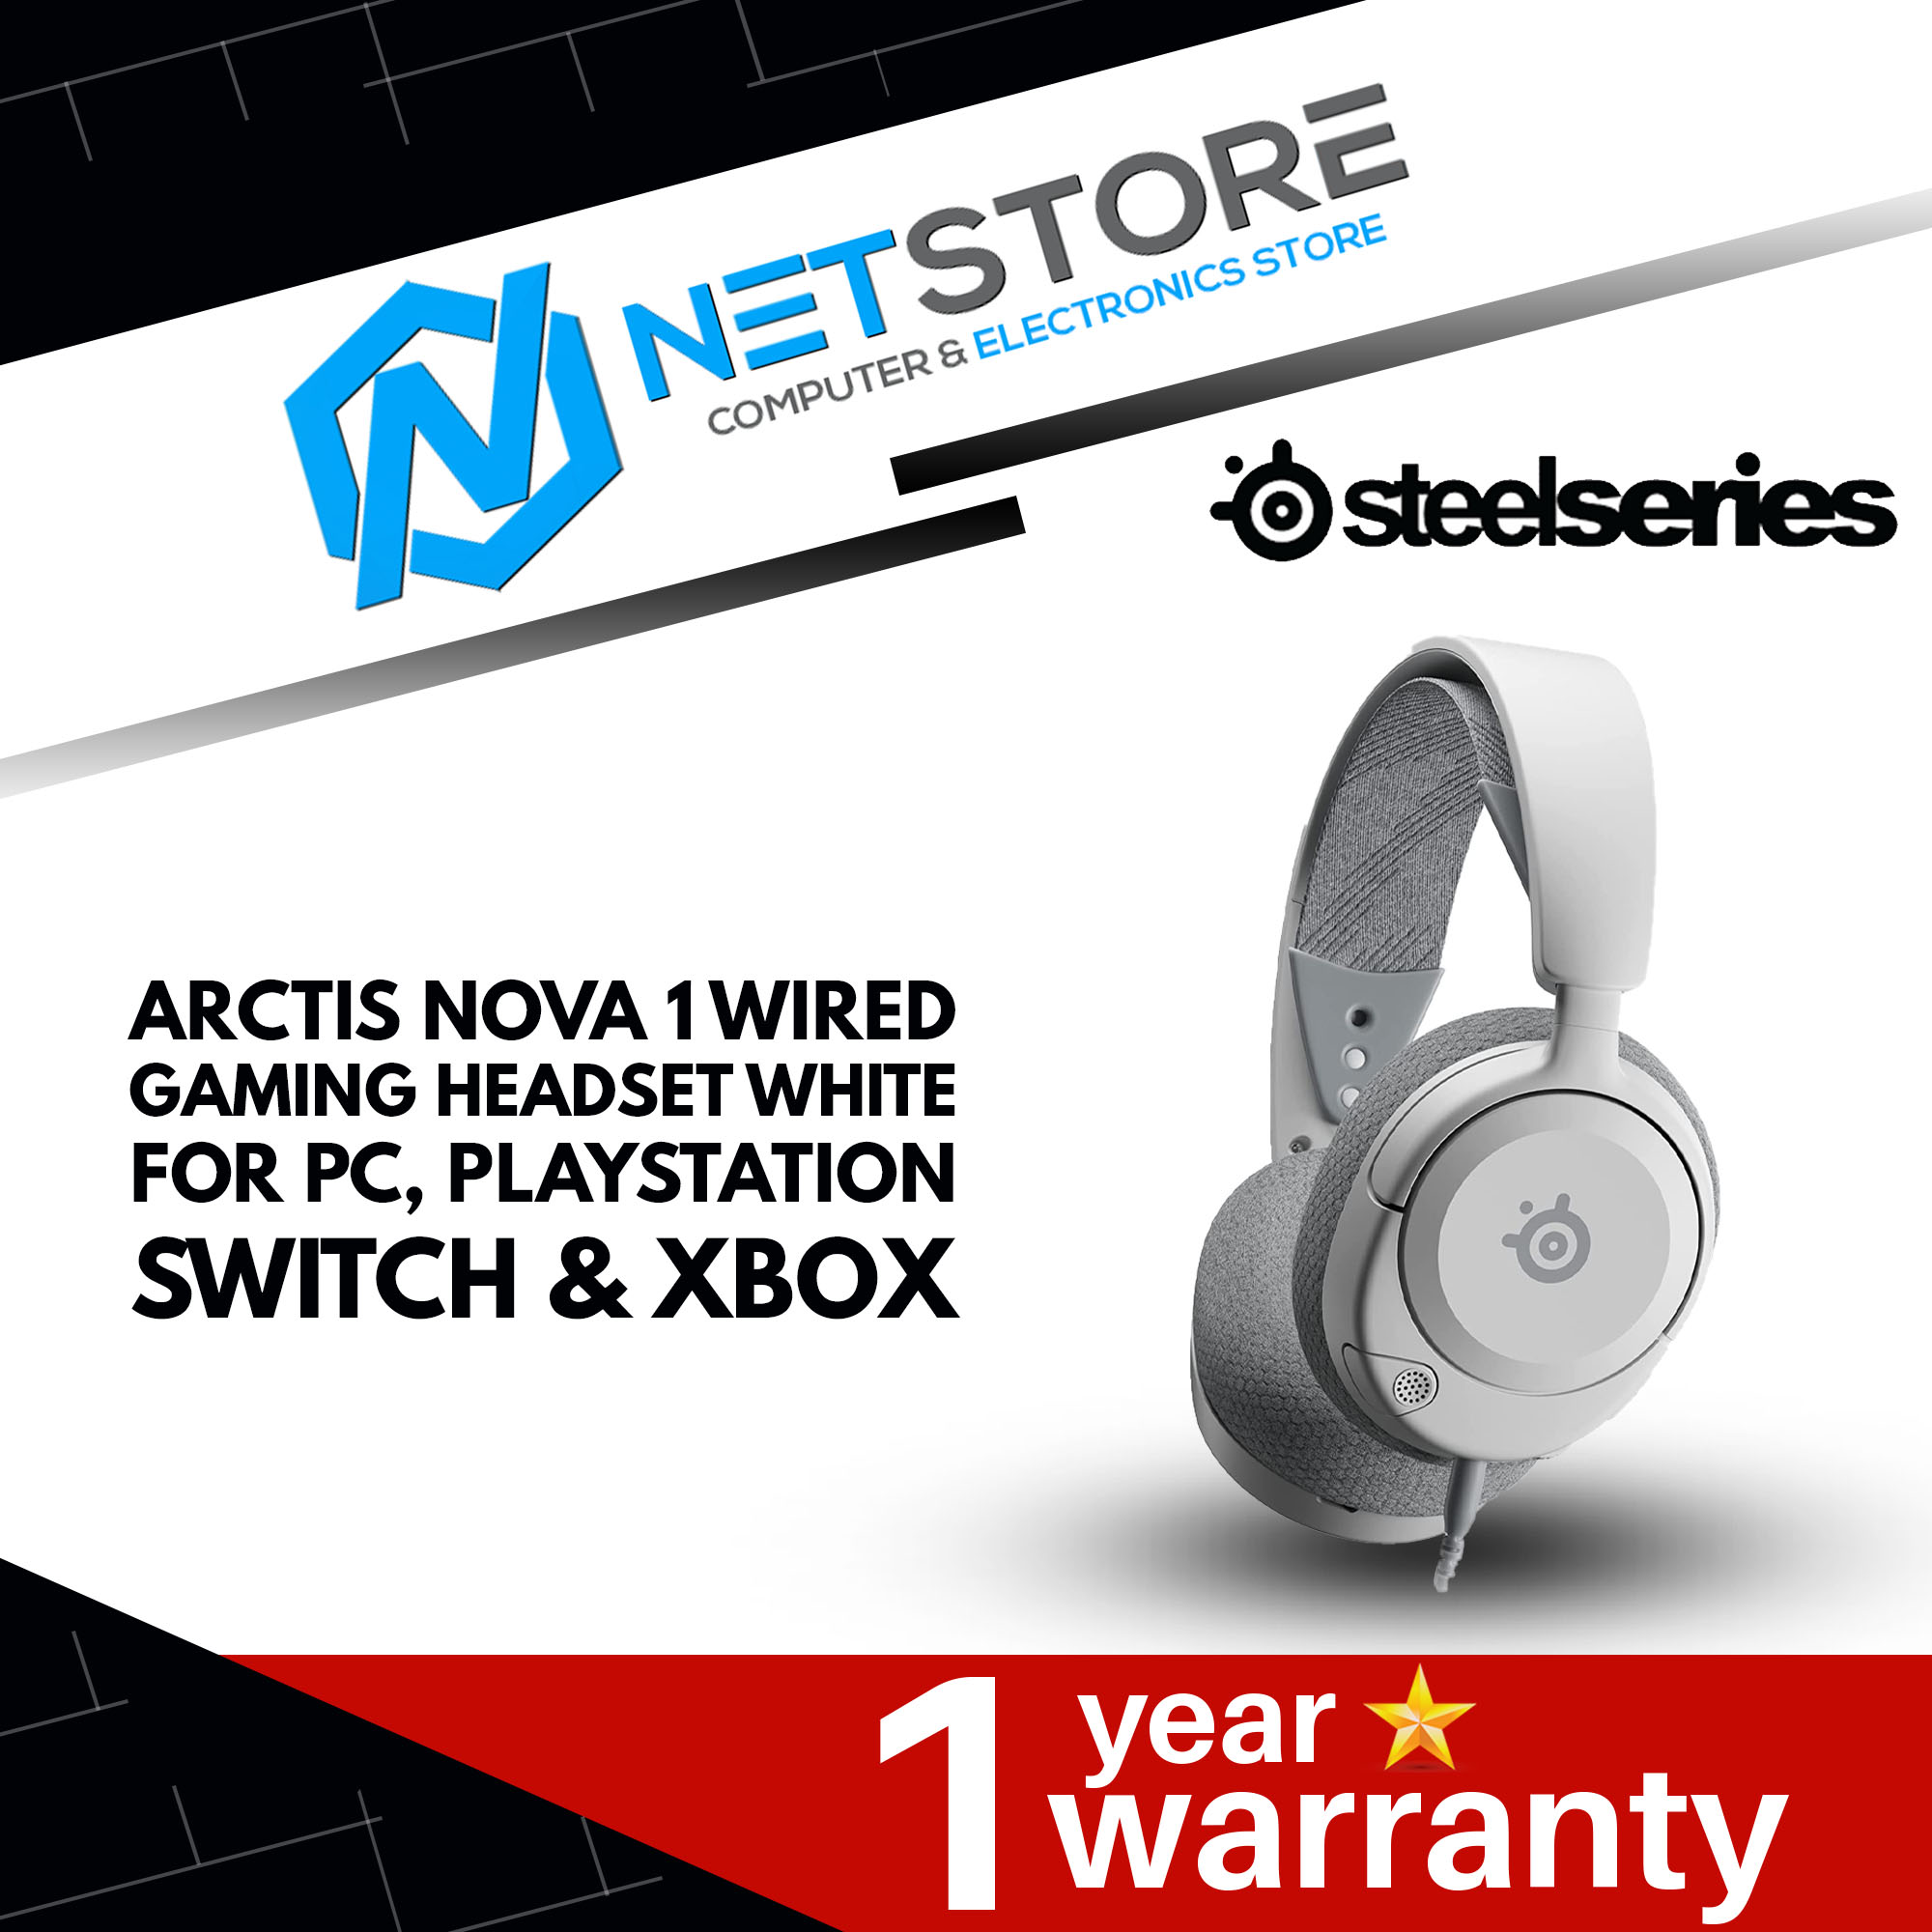 STEELSERIES ARCTIS NOVA 1 HEADSET WHITE FOR PC,PLAYSTATION,SWITCH&amp;XBOX